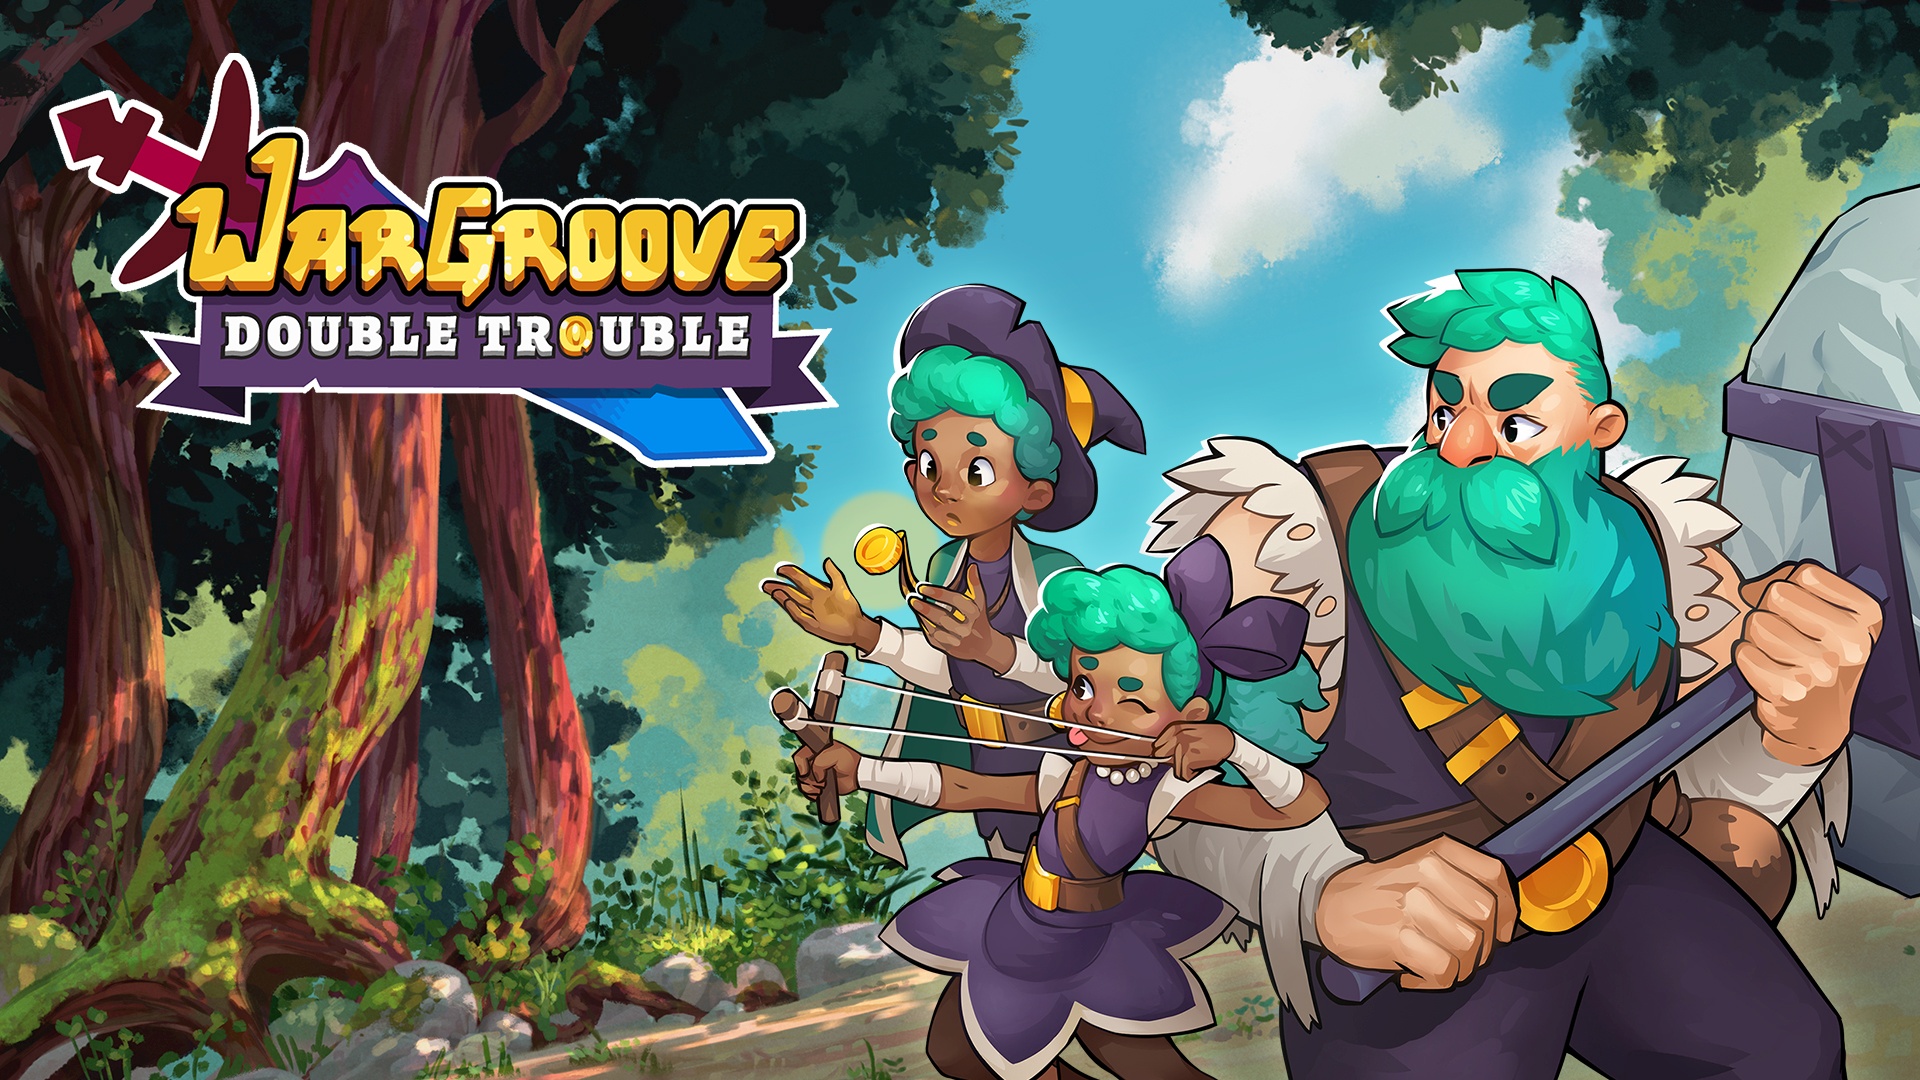 Video For Team up with a Friend in Wargroove: Double Trouble, a Free Expansion Available Now on Xbox